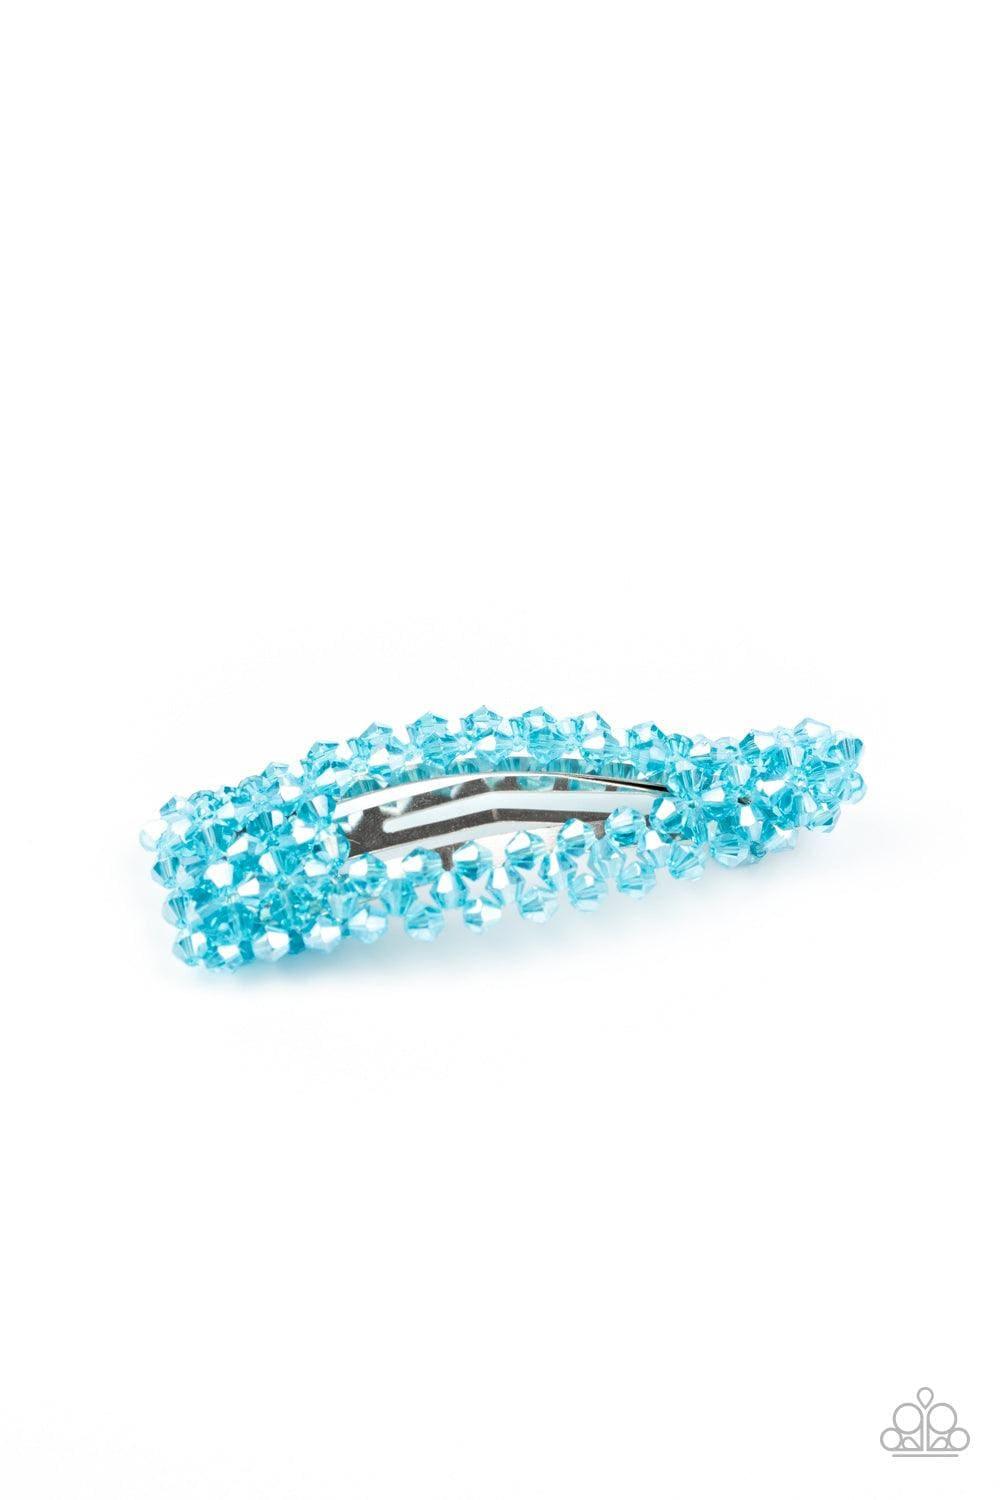 Paparazzi Accessories - Just Follow The Glitter - Blue Hair Clip - Bling by JessieK